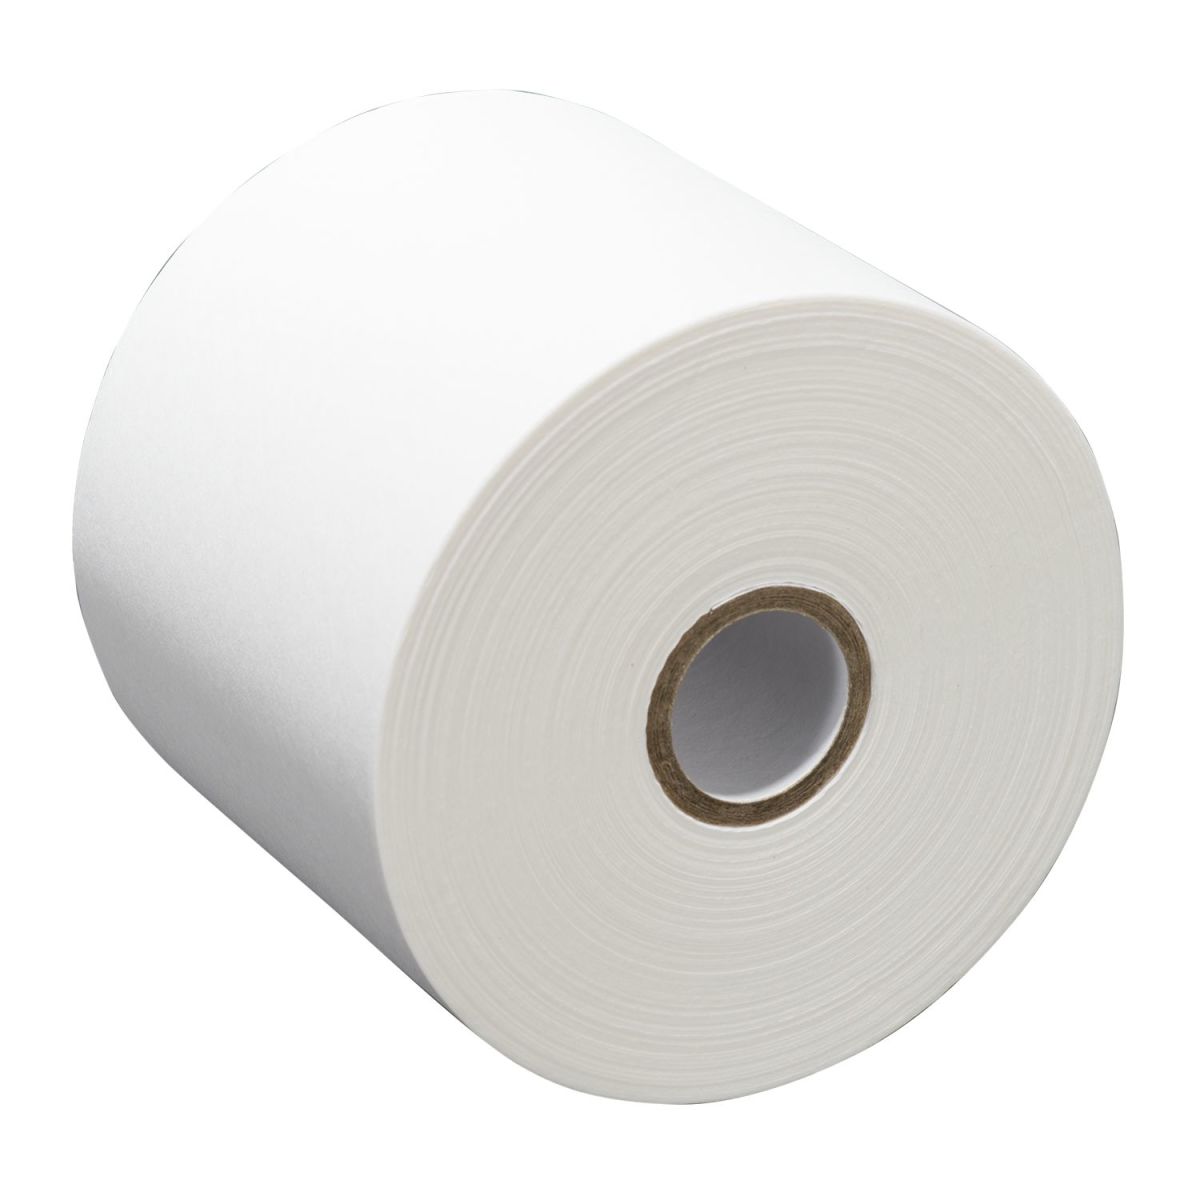 Filter Paper | 1 Roll or Case of 36 Rolls